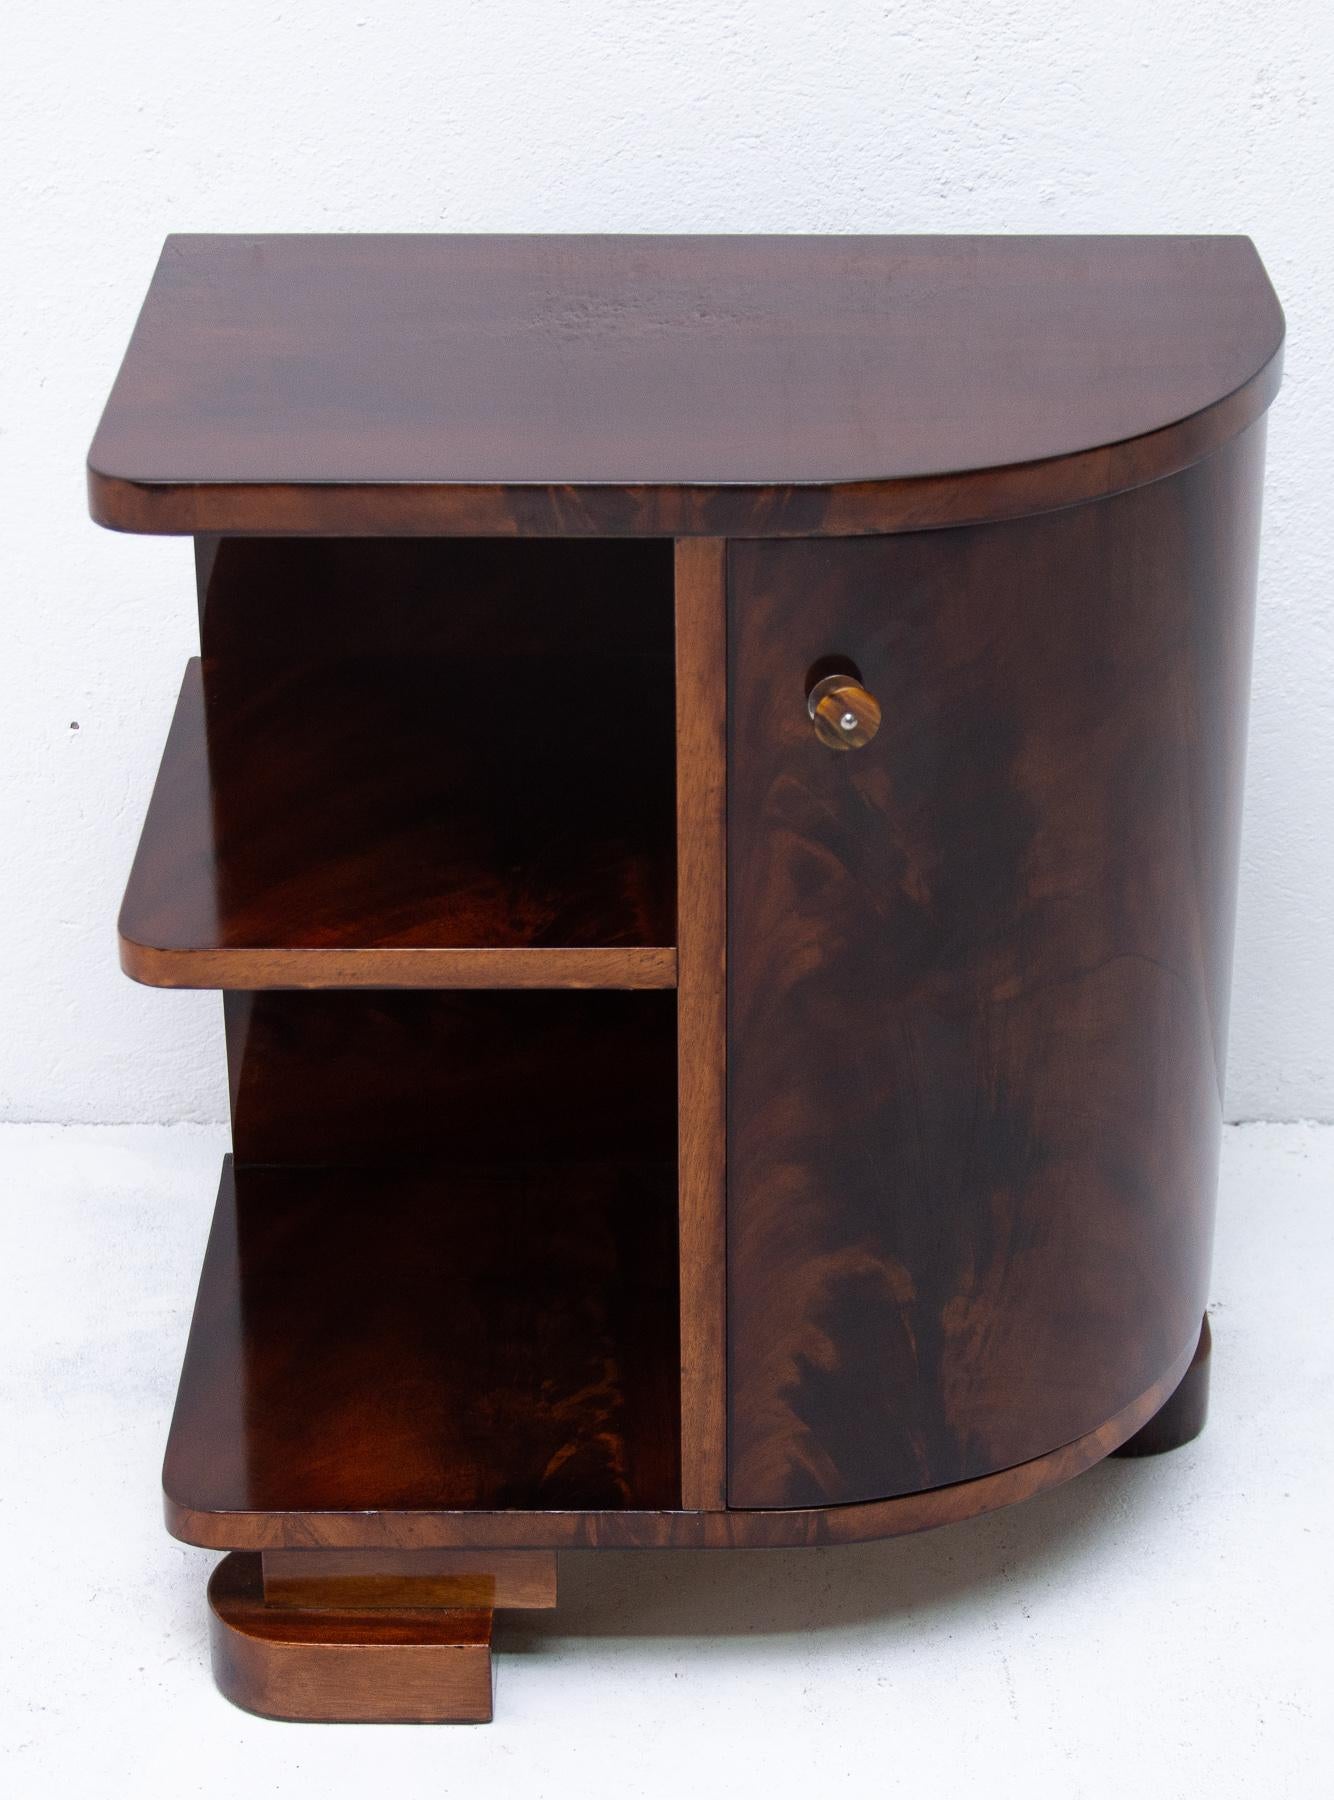 This walnut Art Deco dry bar was made in the 1930s in Bohemia. The cabinet has very interesting shapes and is a wonderful example of the typical Art Deco style. It was completely refurbished and polished to a high gloss.
It features a storage space